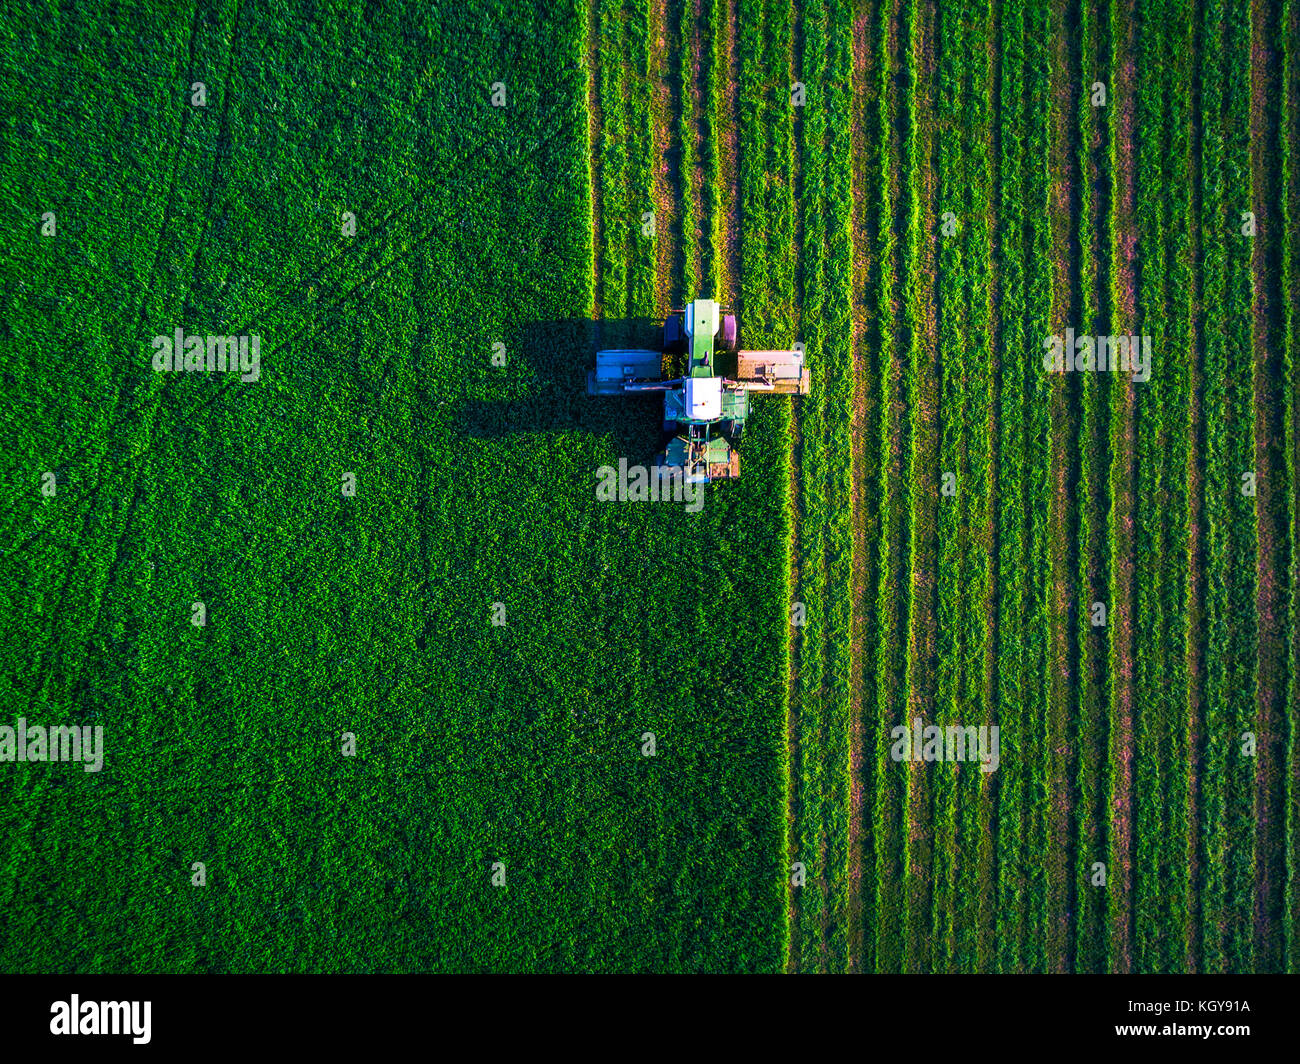 Tractor mowing green field, aerial view Stock Photo